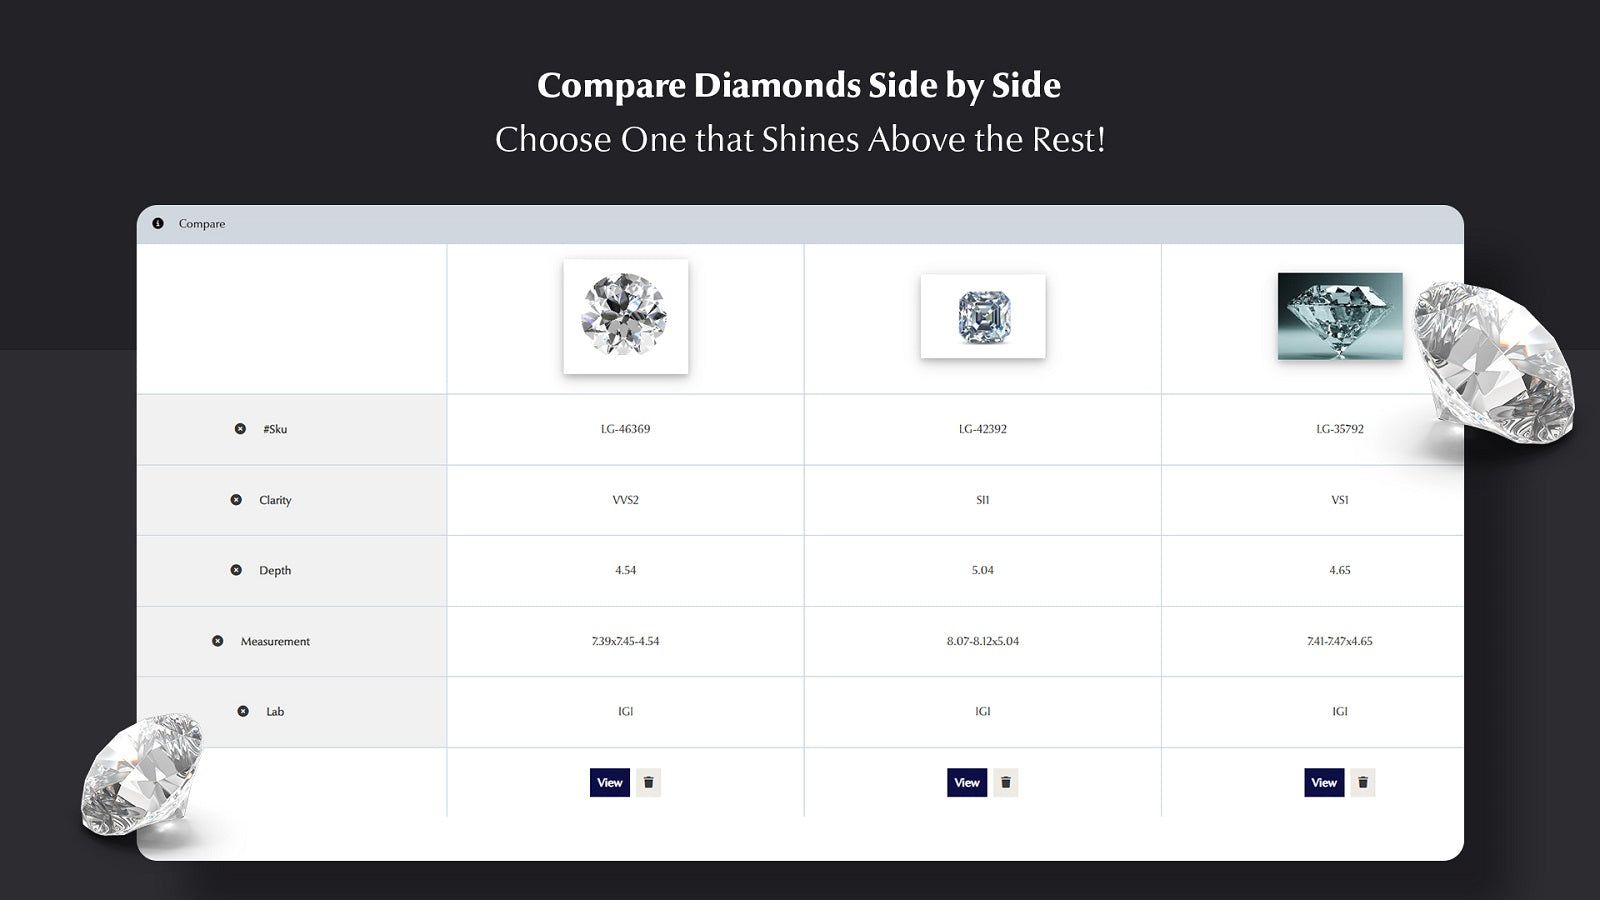  Side-by-side diamond comparison feature.